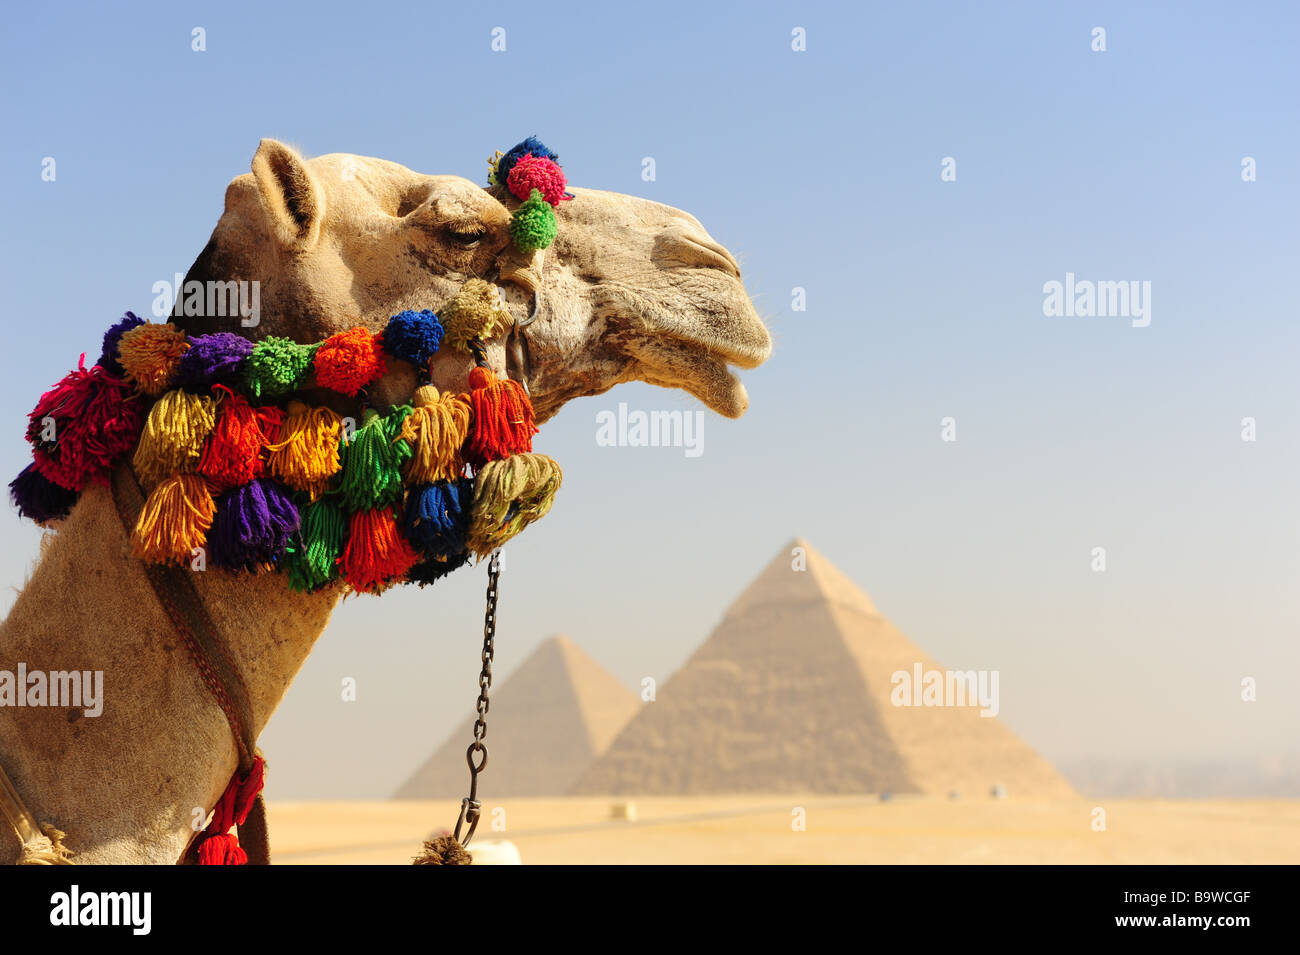 Egypt_Giza_The_Great_Pyramids_camels-B9W